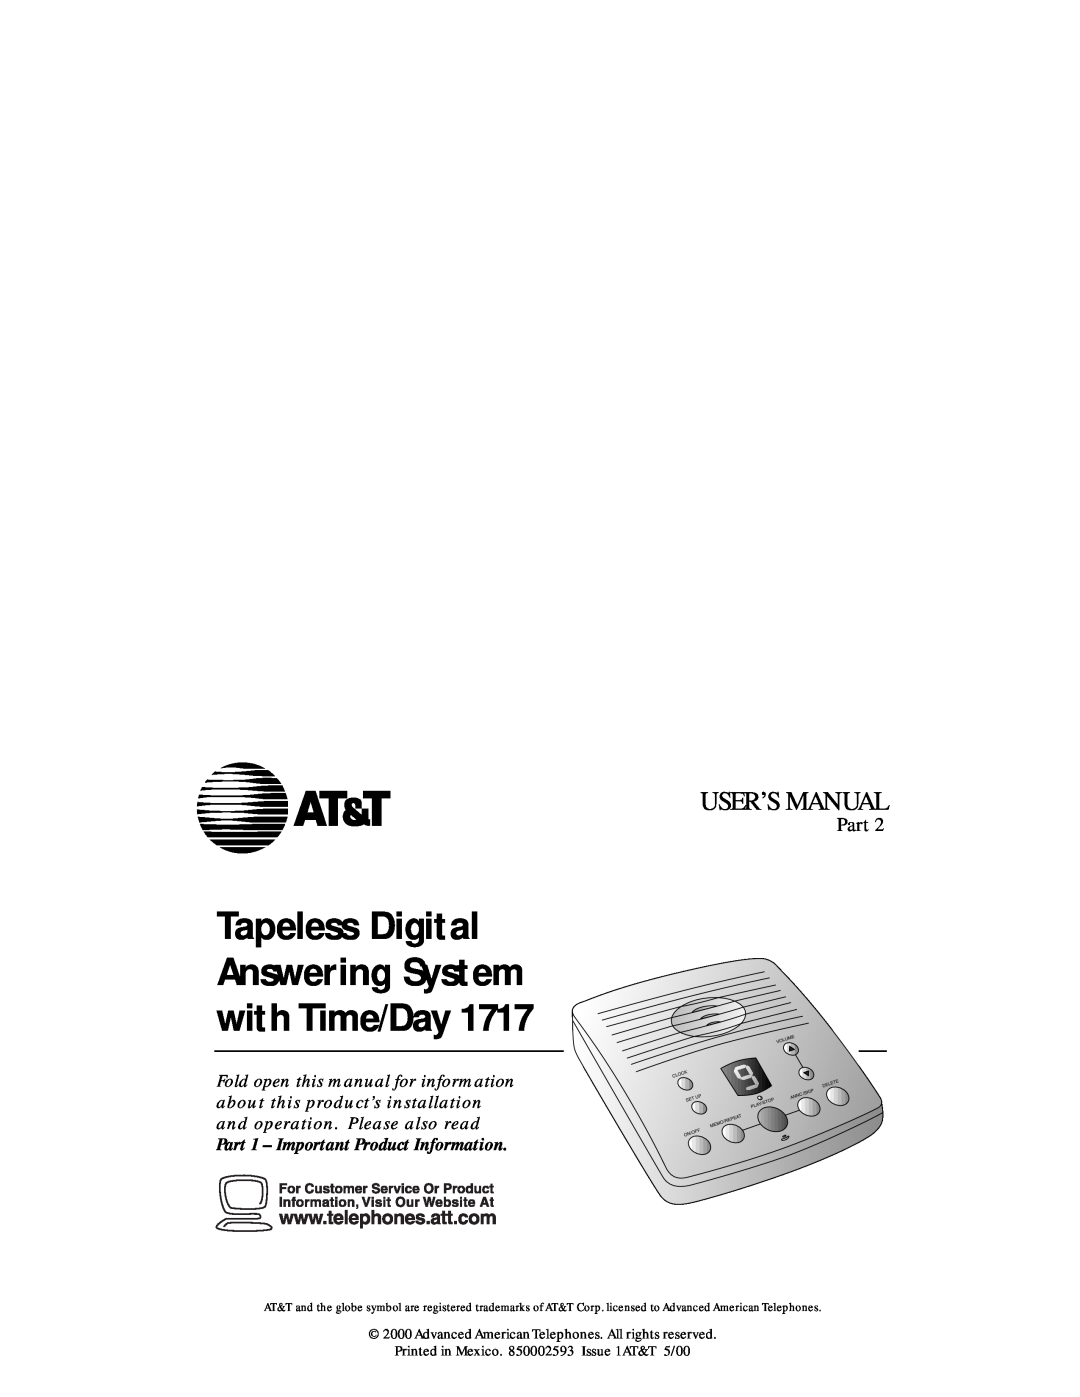 AT&T 850002593 user manual Part 1 - Important Product Information, Tapeless Digital Answering System with Time/Day 